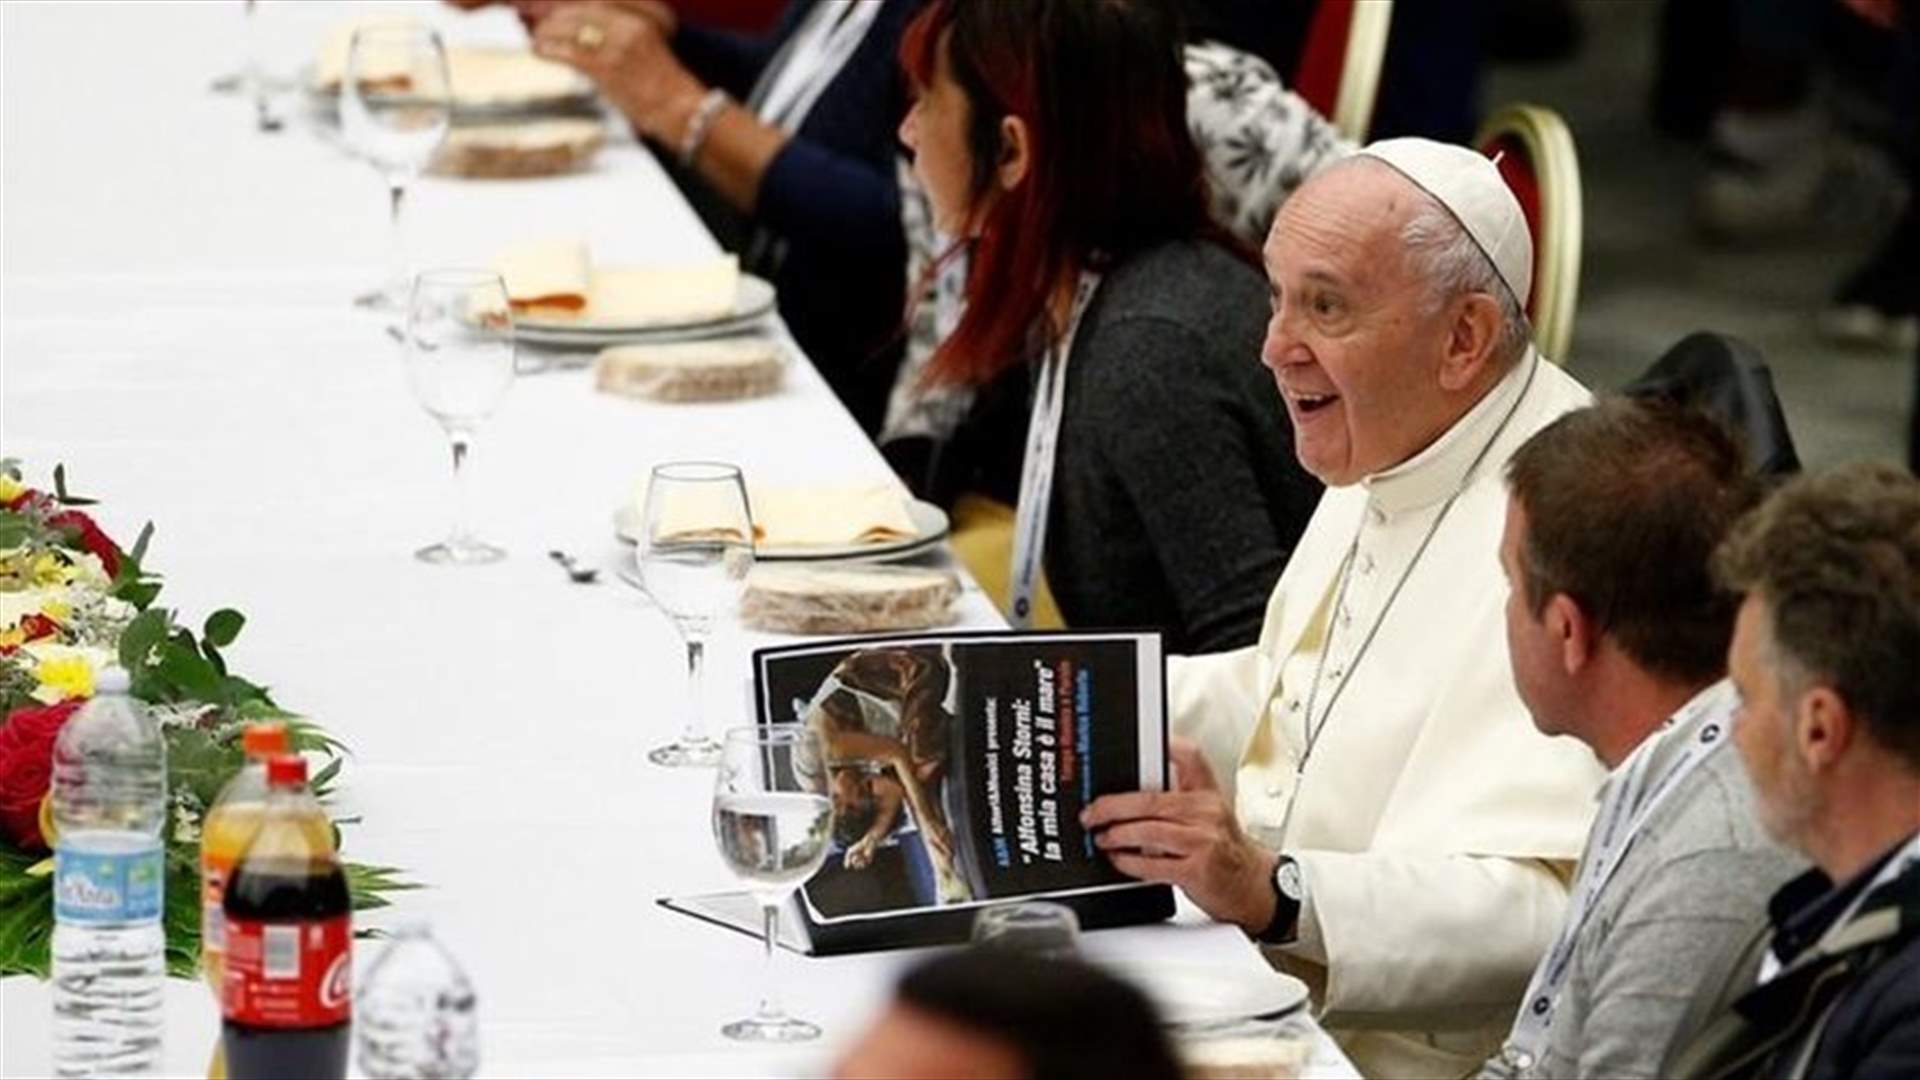 Pope hosts meal for 1,500 needy people